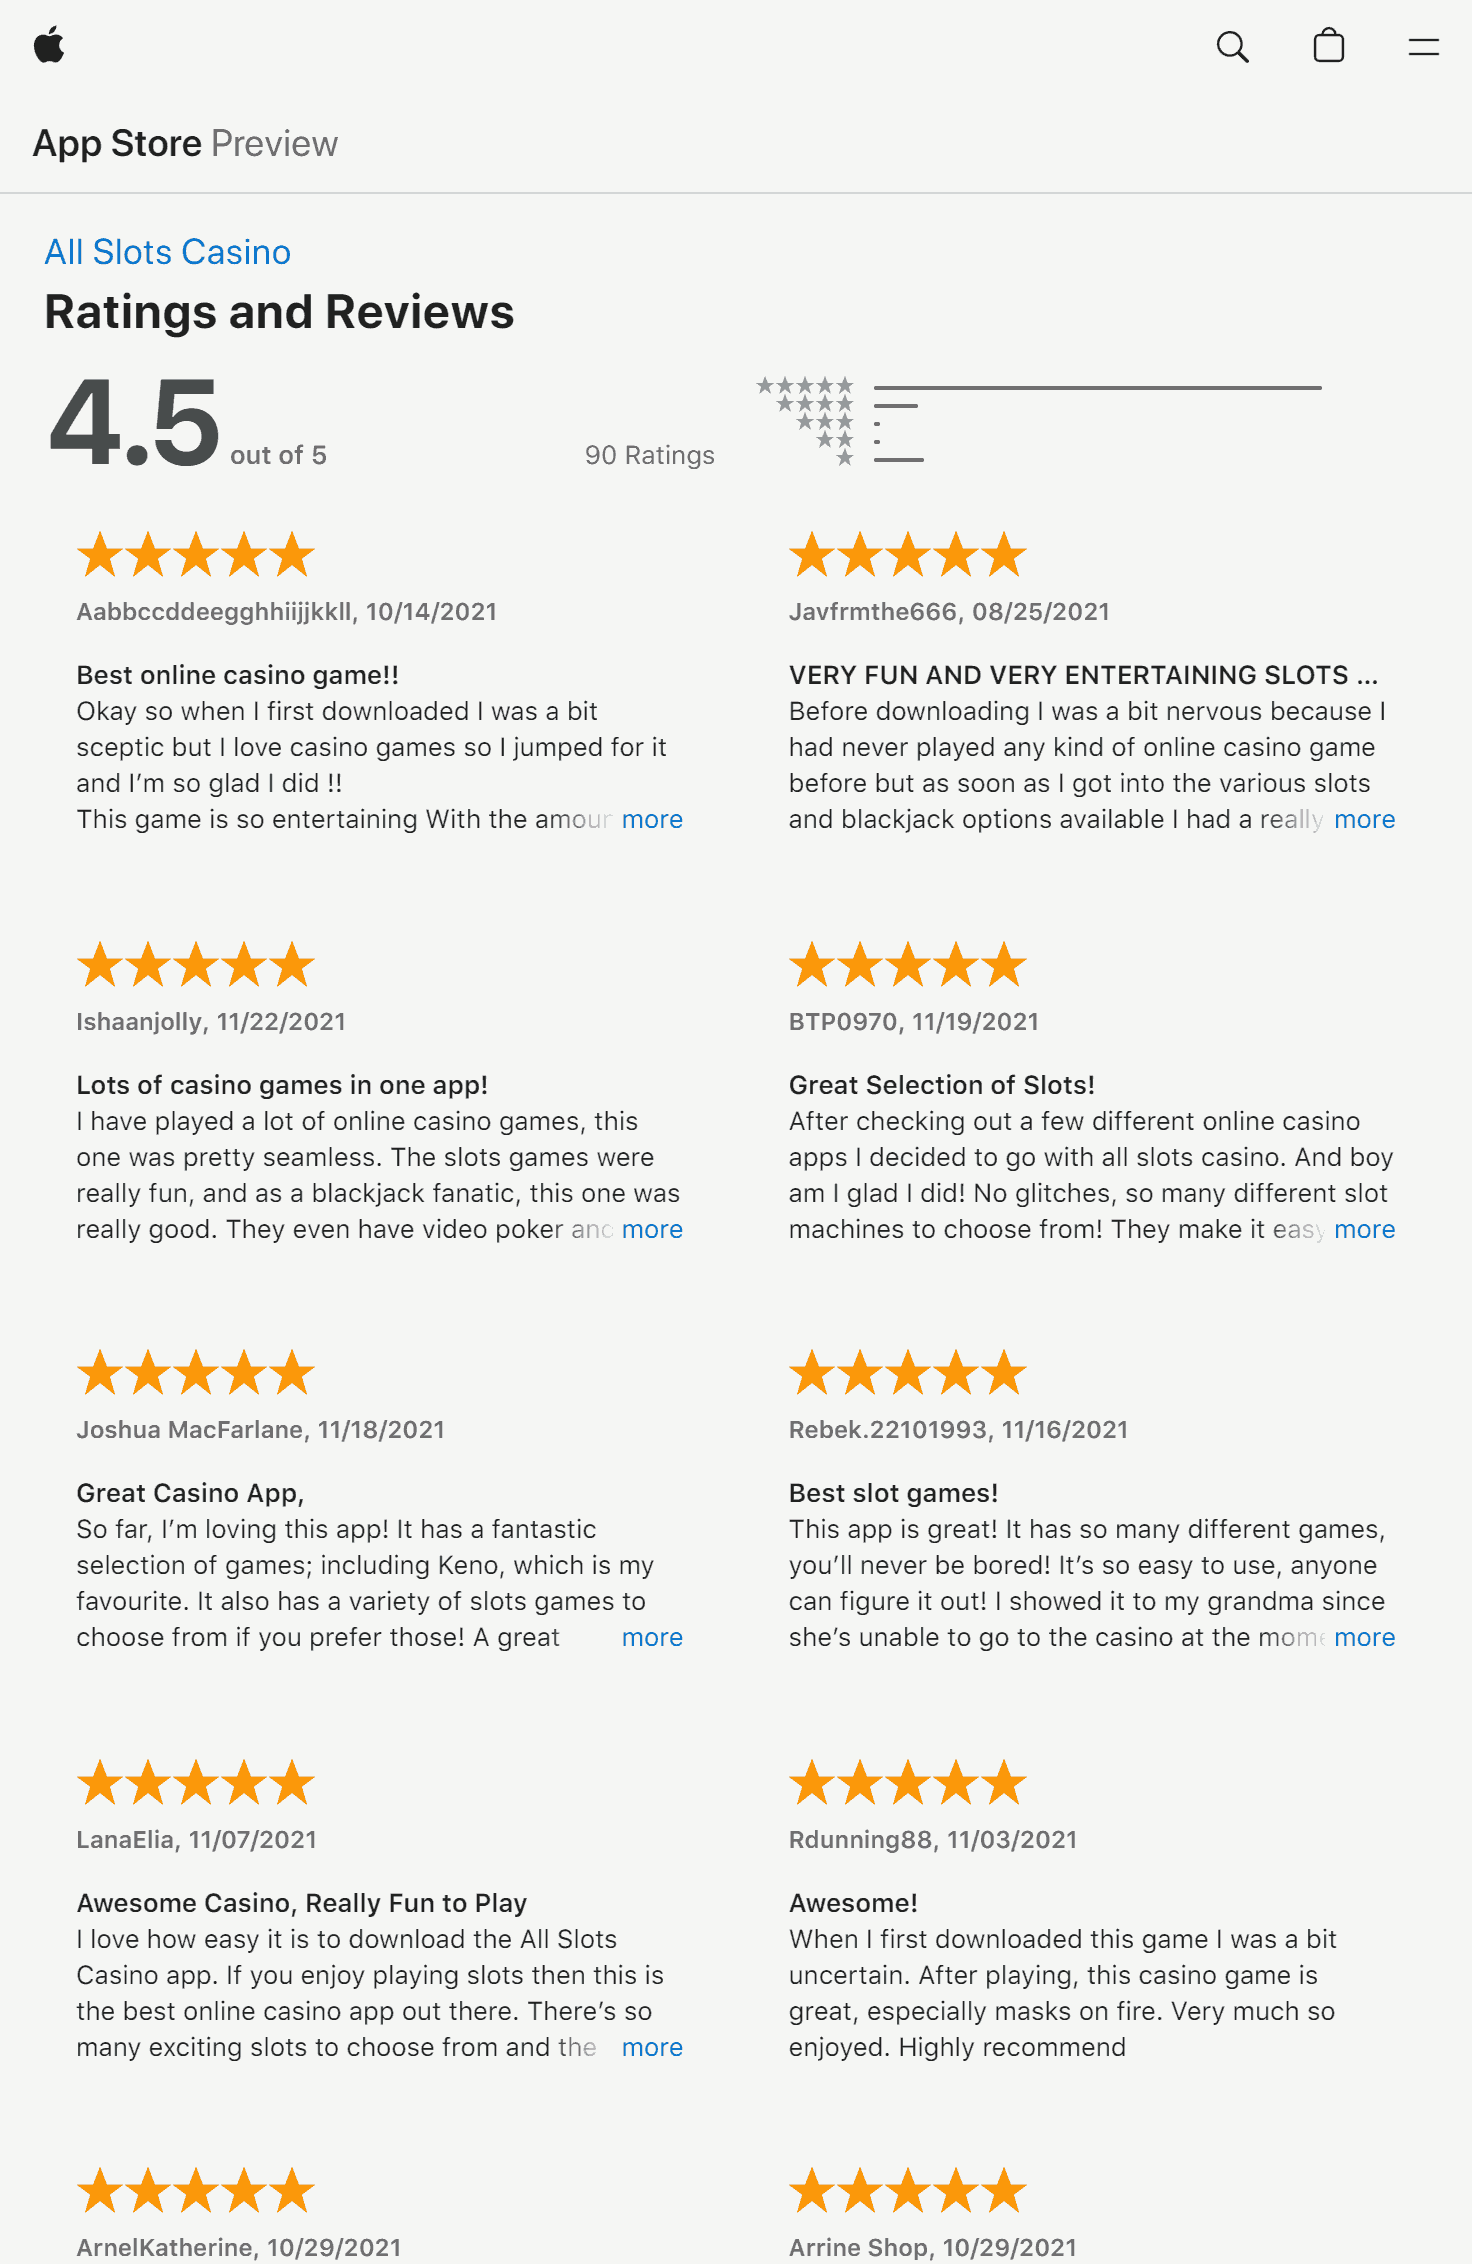 Apple App store ratings and reviews for the All Slots